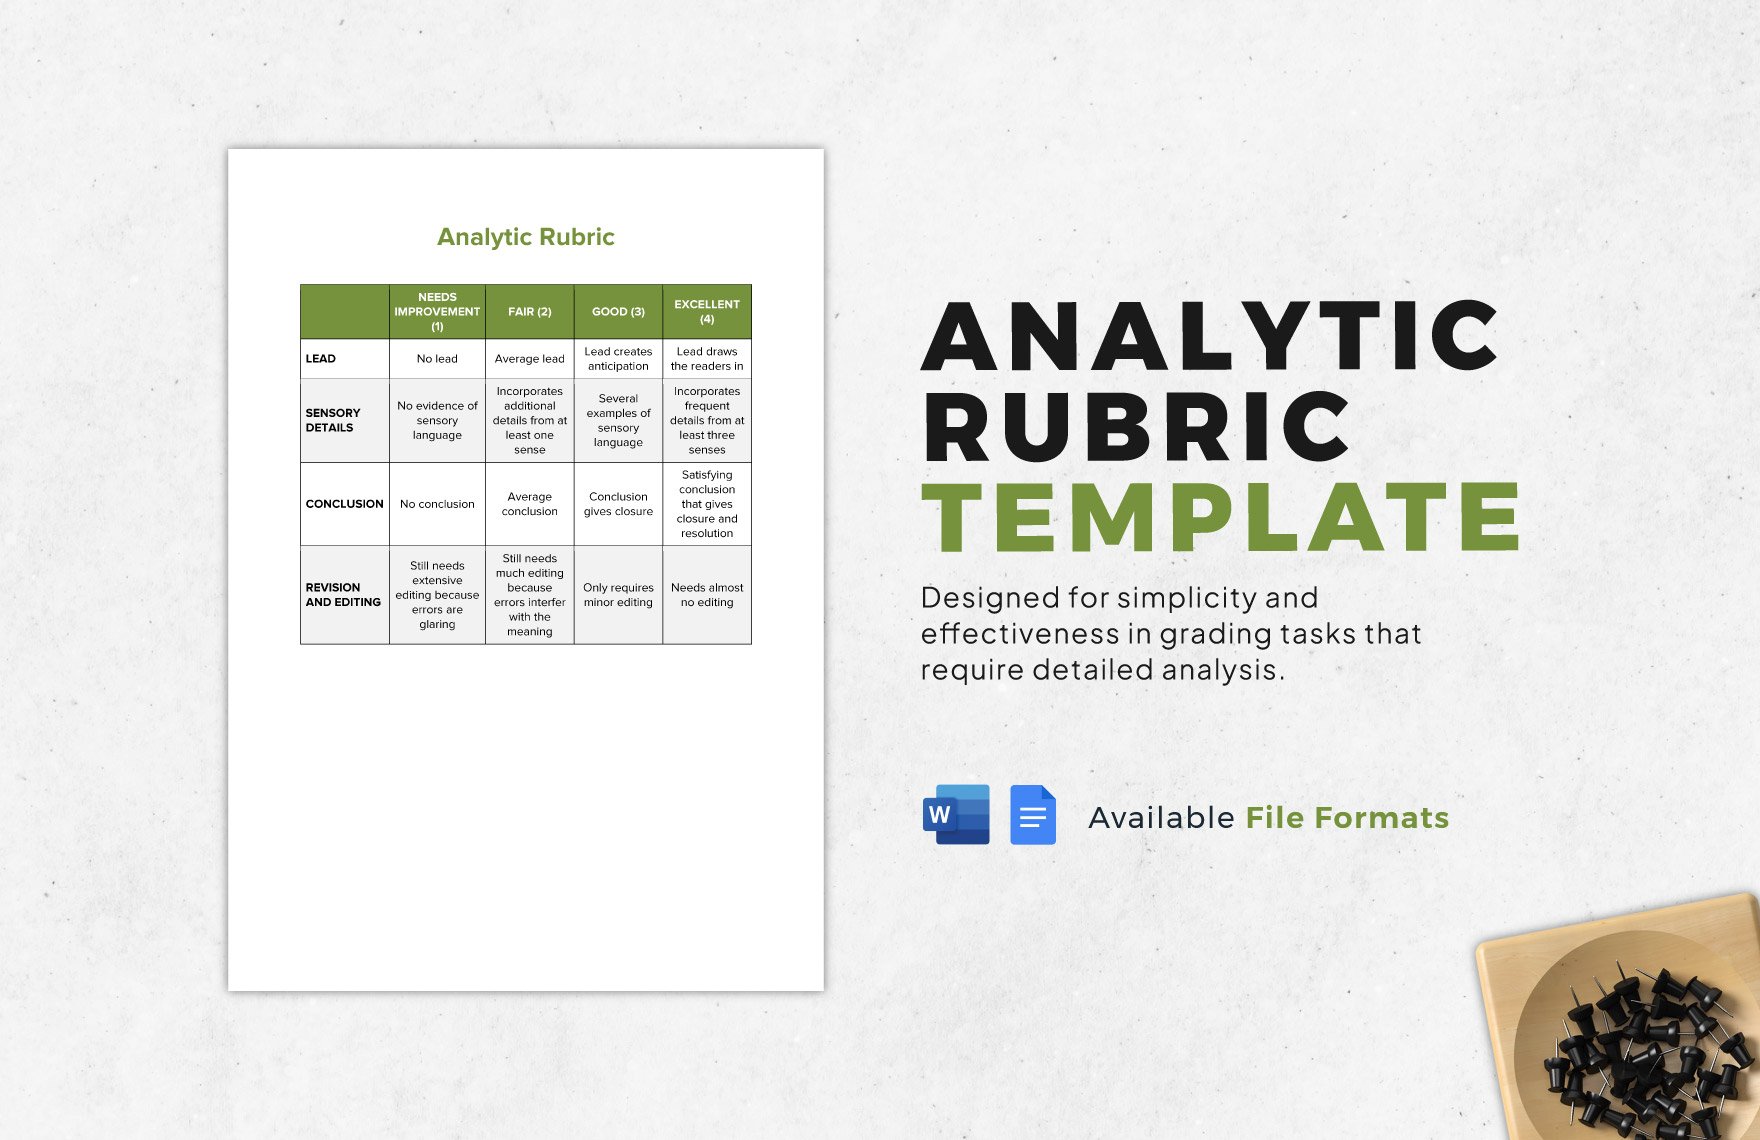 Analytic Rubric Template in Word, Google Docs